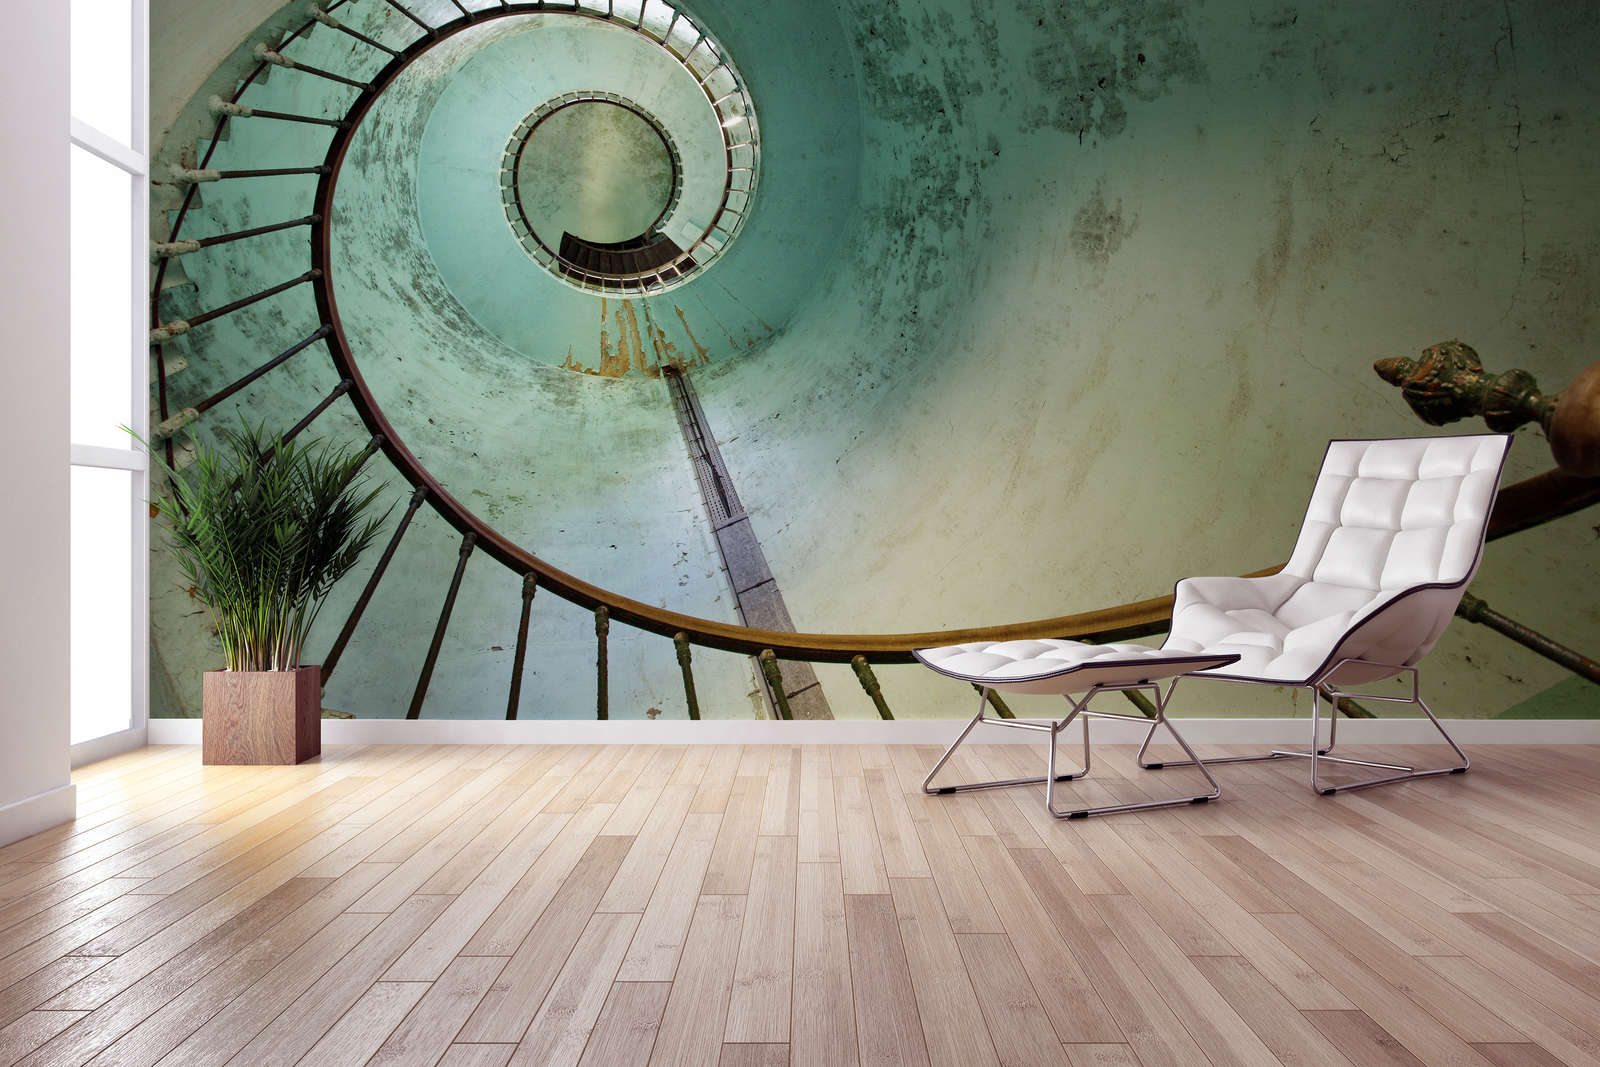             Photo wallpaper old staircase with spiral staircase - Premium smooth fleece
        